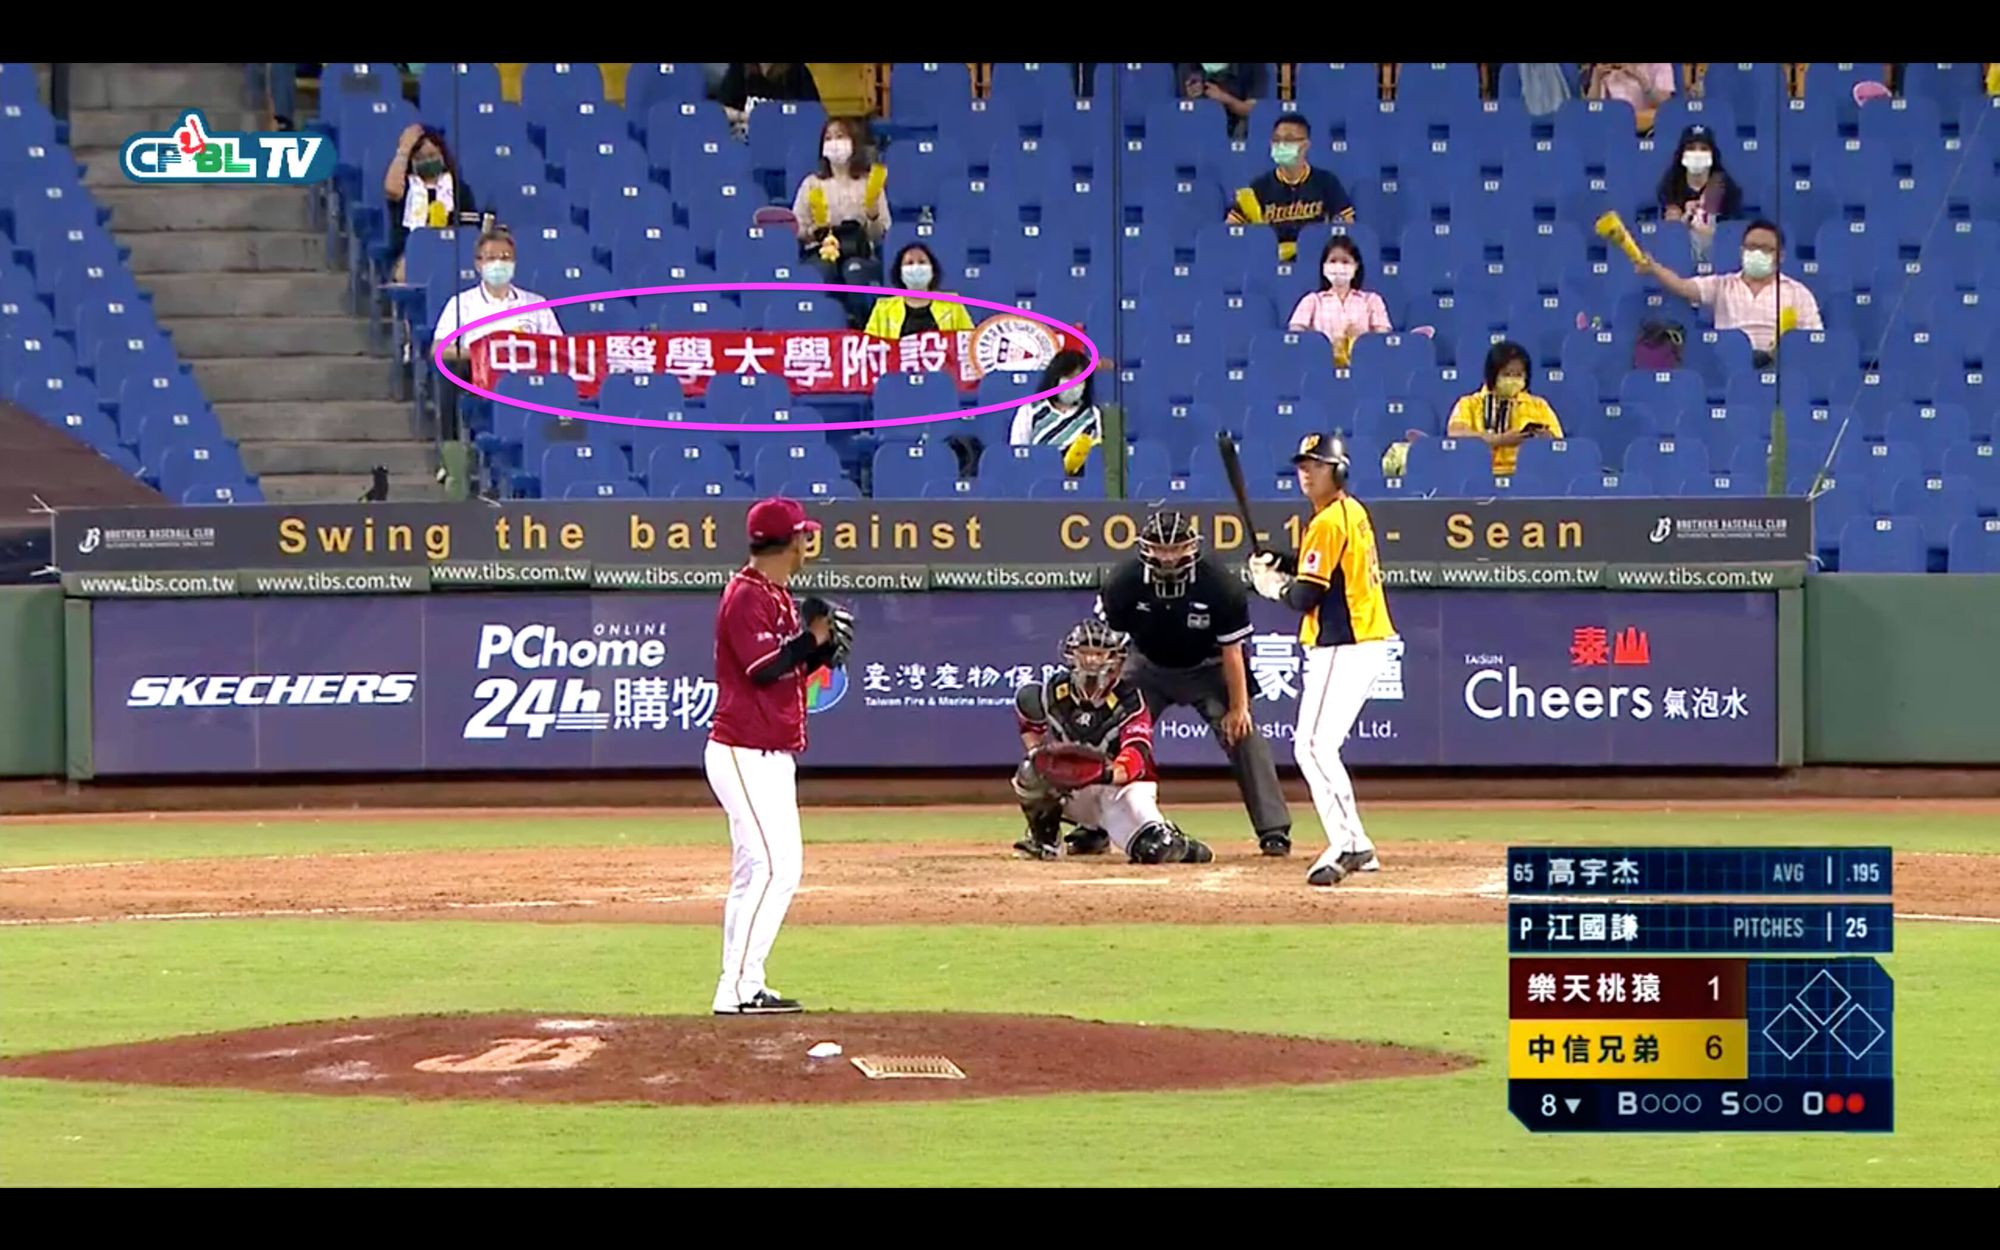 The banner behind home plate at the @RakutenMonkeys vs @CTBC_Brothers game in Taichung writes ‘Chung Shan Medical University Hospital. 